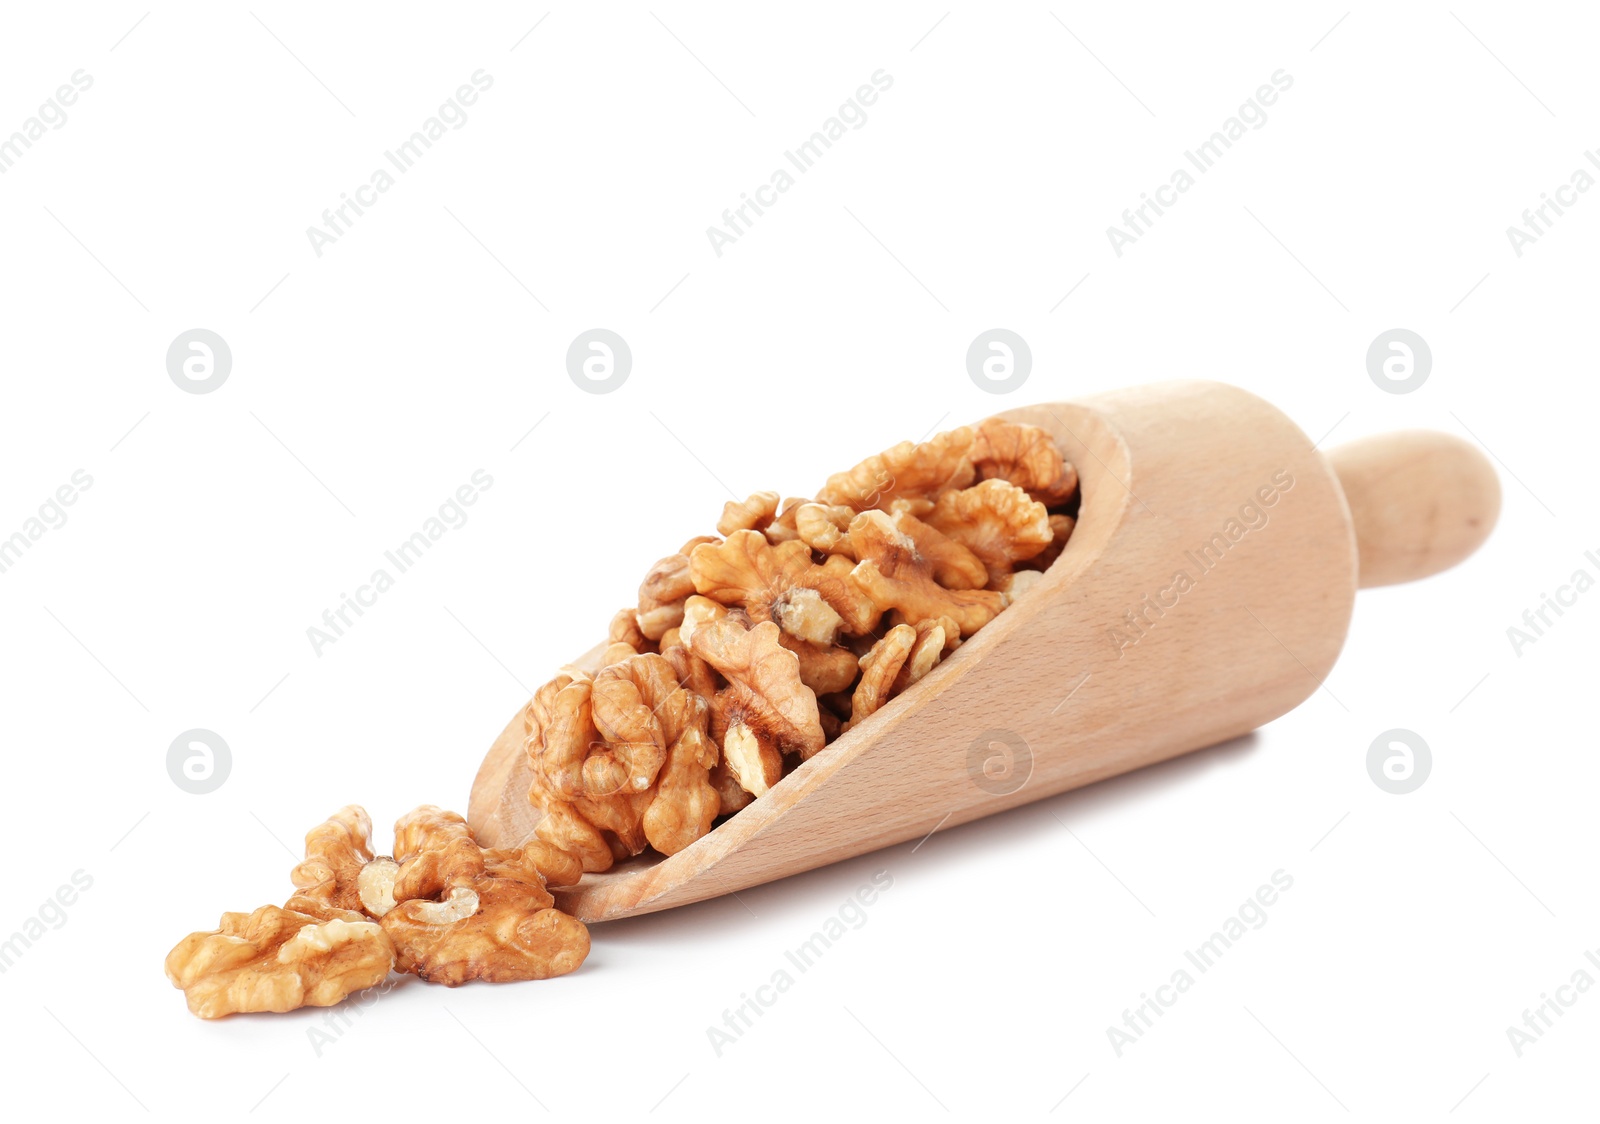 Photo of Wooden scoop with tasty walnuts on white background